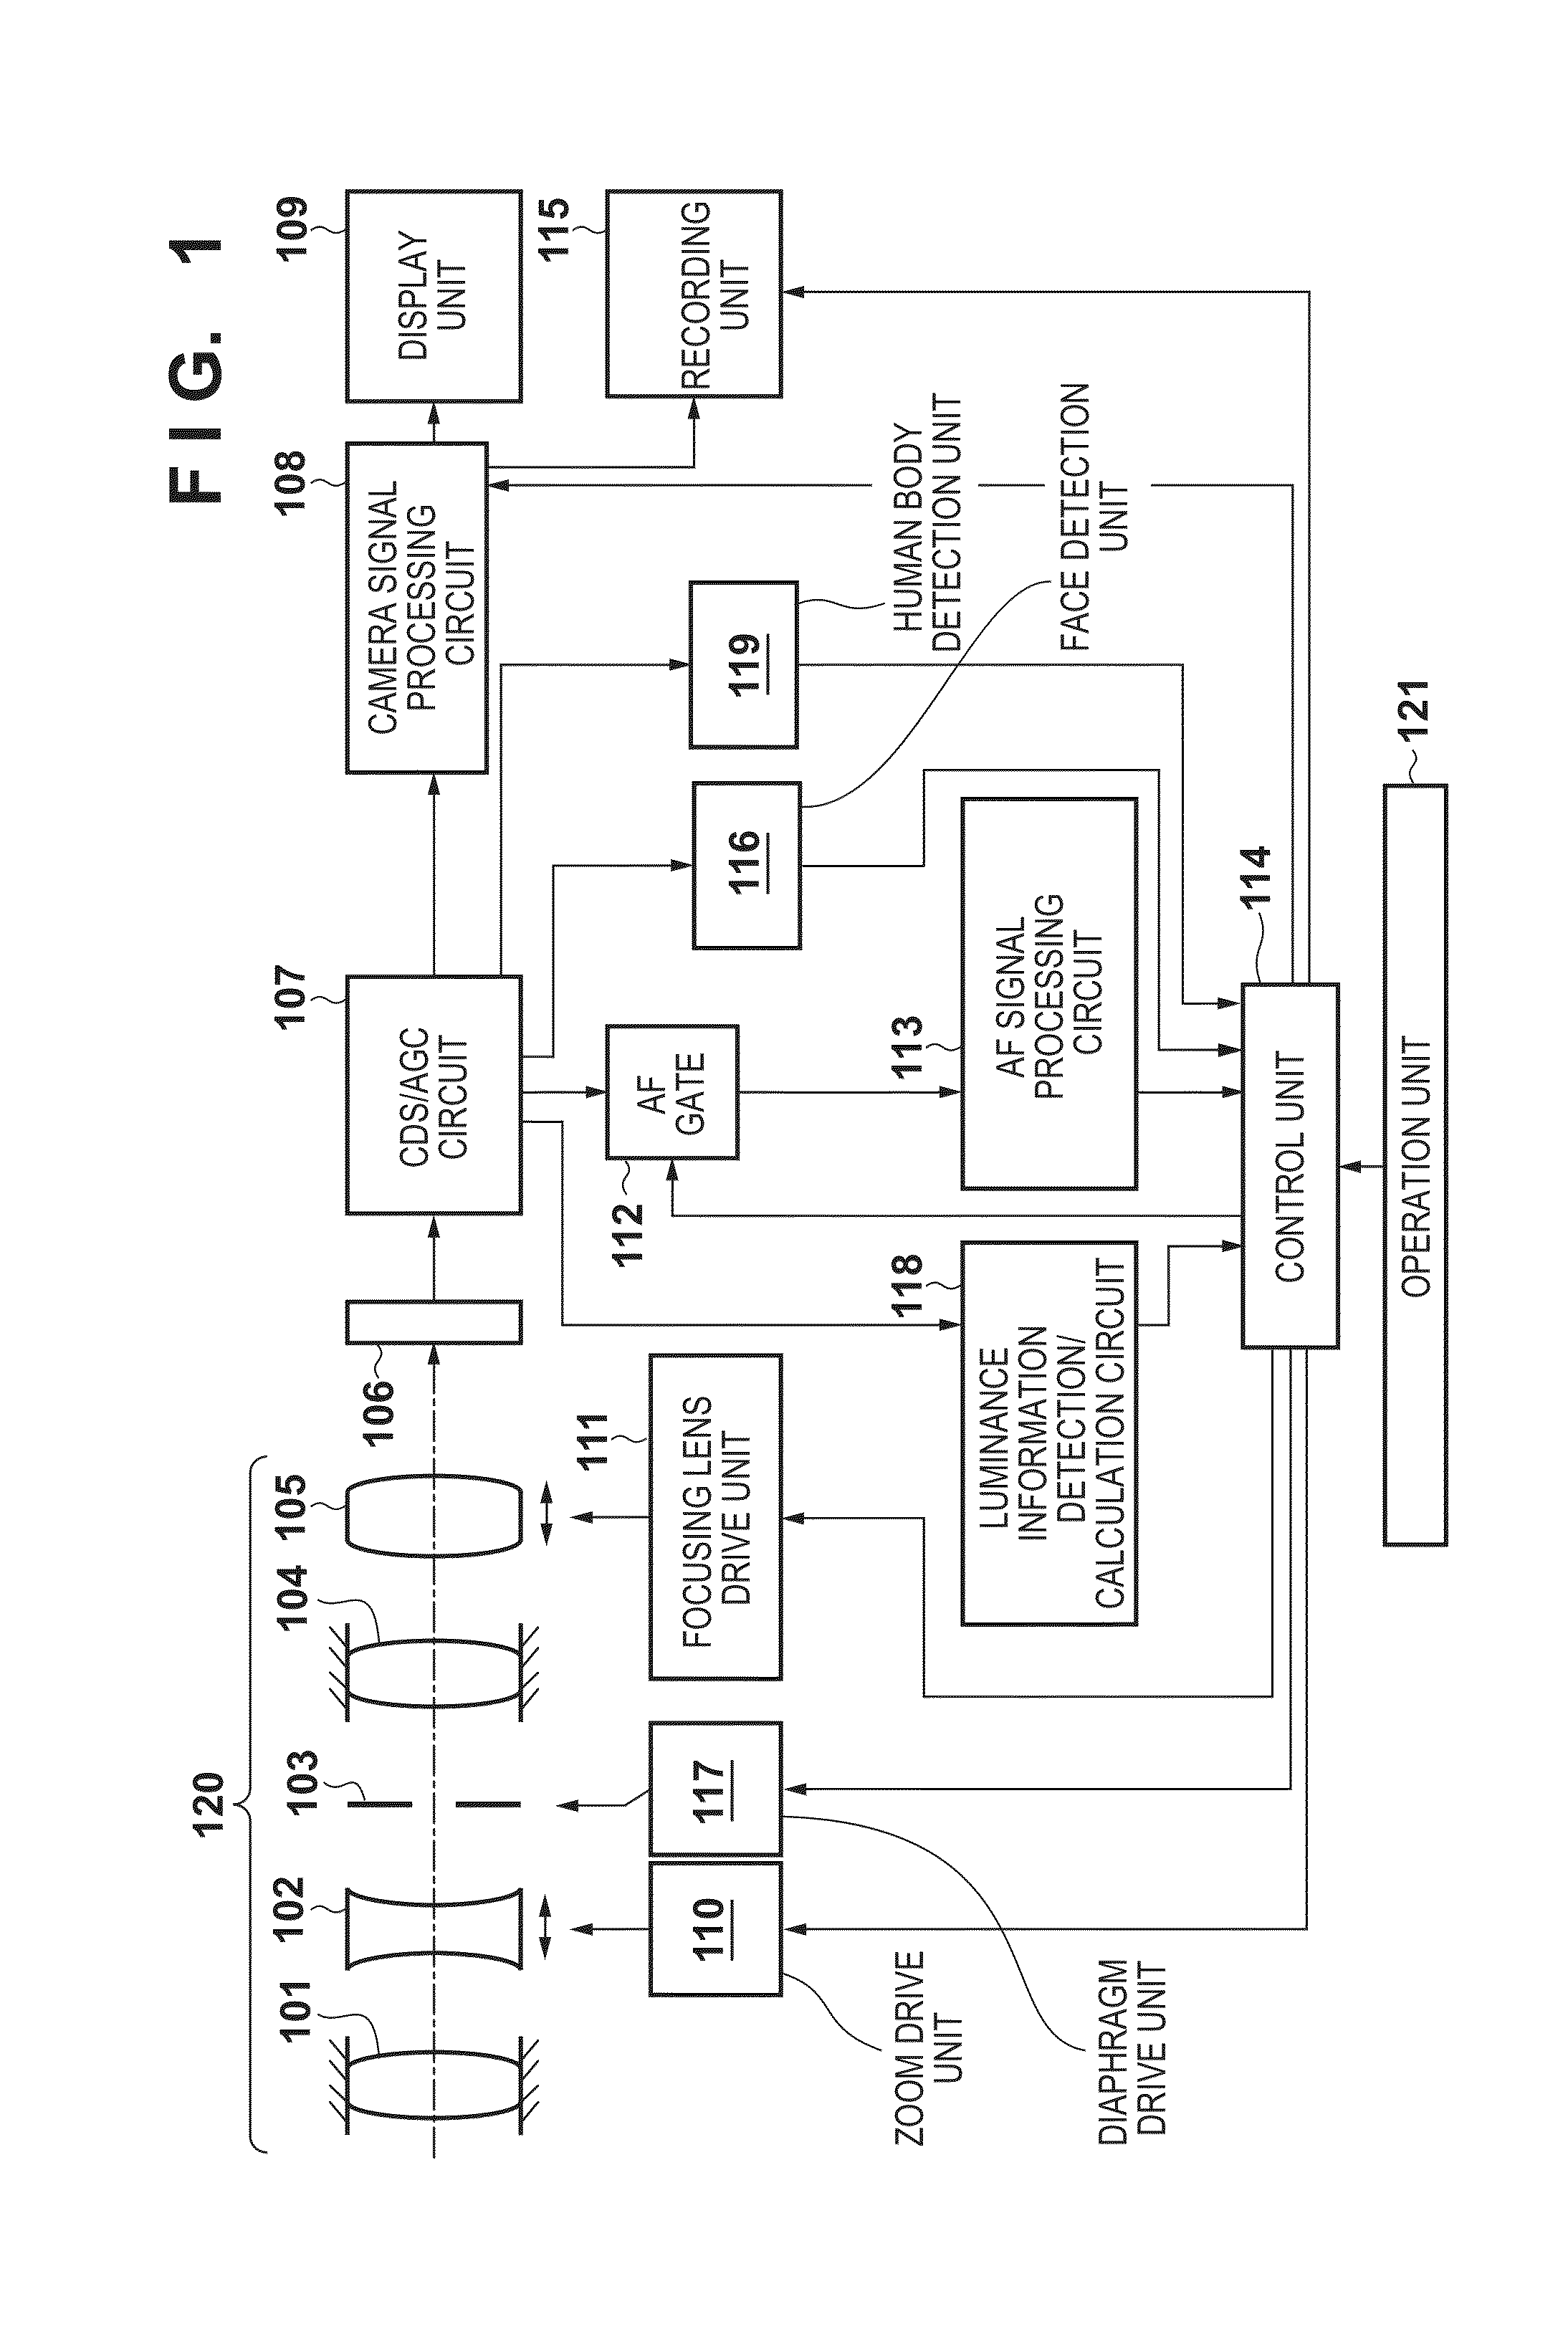 Automatic focus detection apparatus, control method for the same, and image pickup apparatus